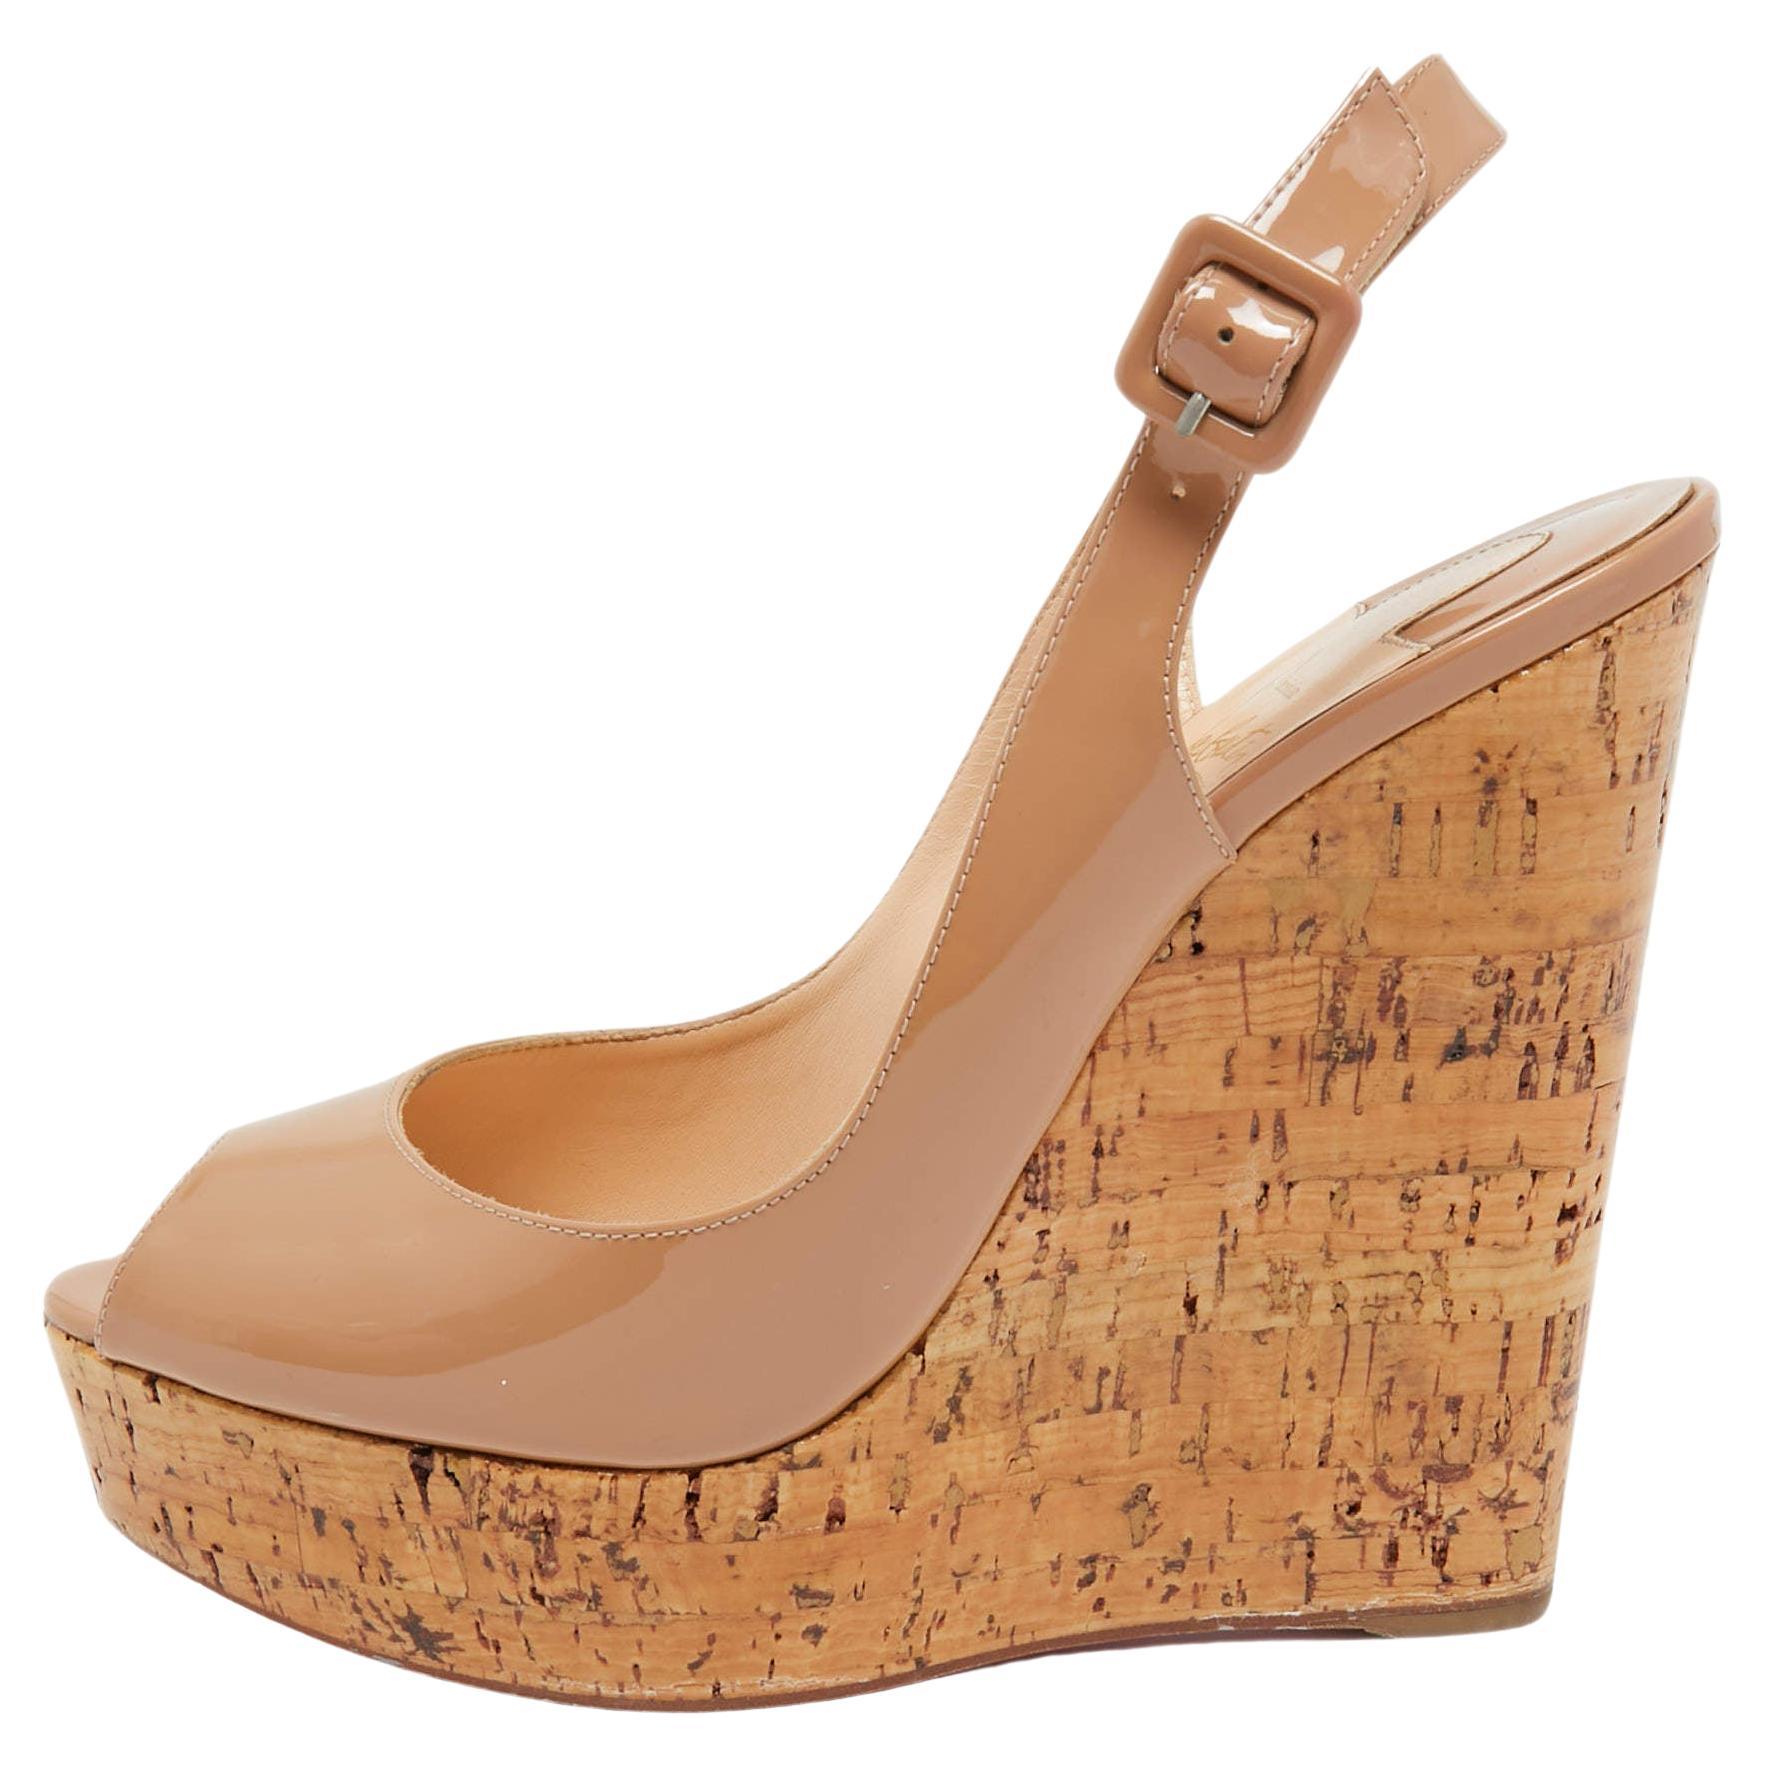 Christian Louboutin Beige Patent Leather Peep Toe Ankle Strap Wedge Sandals Size For Sale